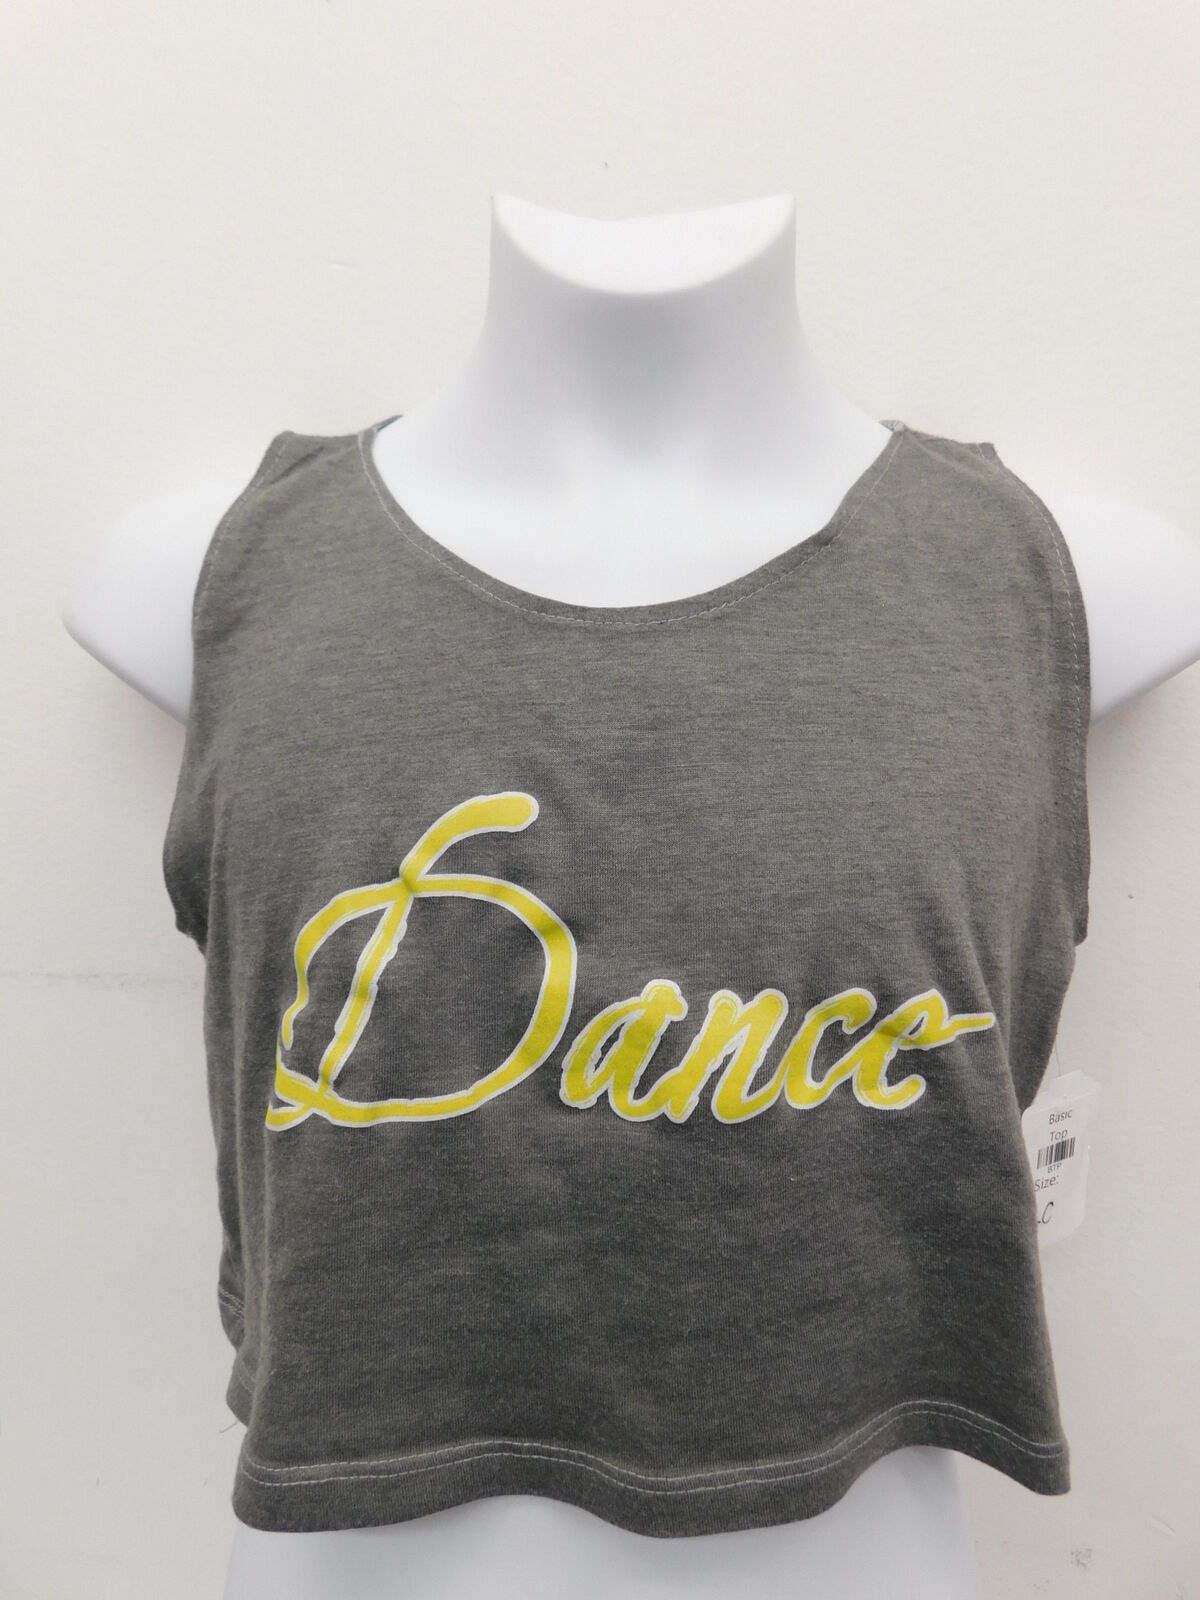 Dance Costume Unbranded  Large Child Grey  Top Tank Dance